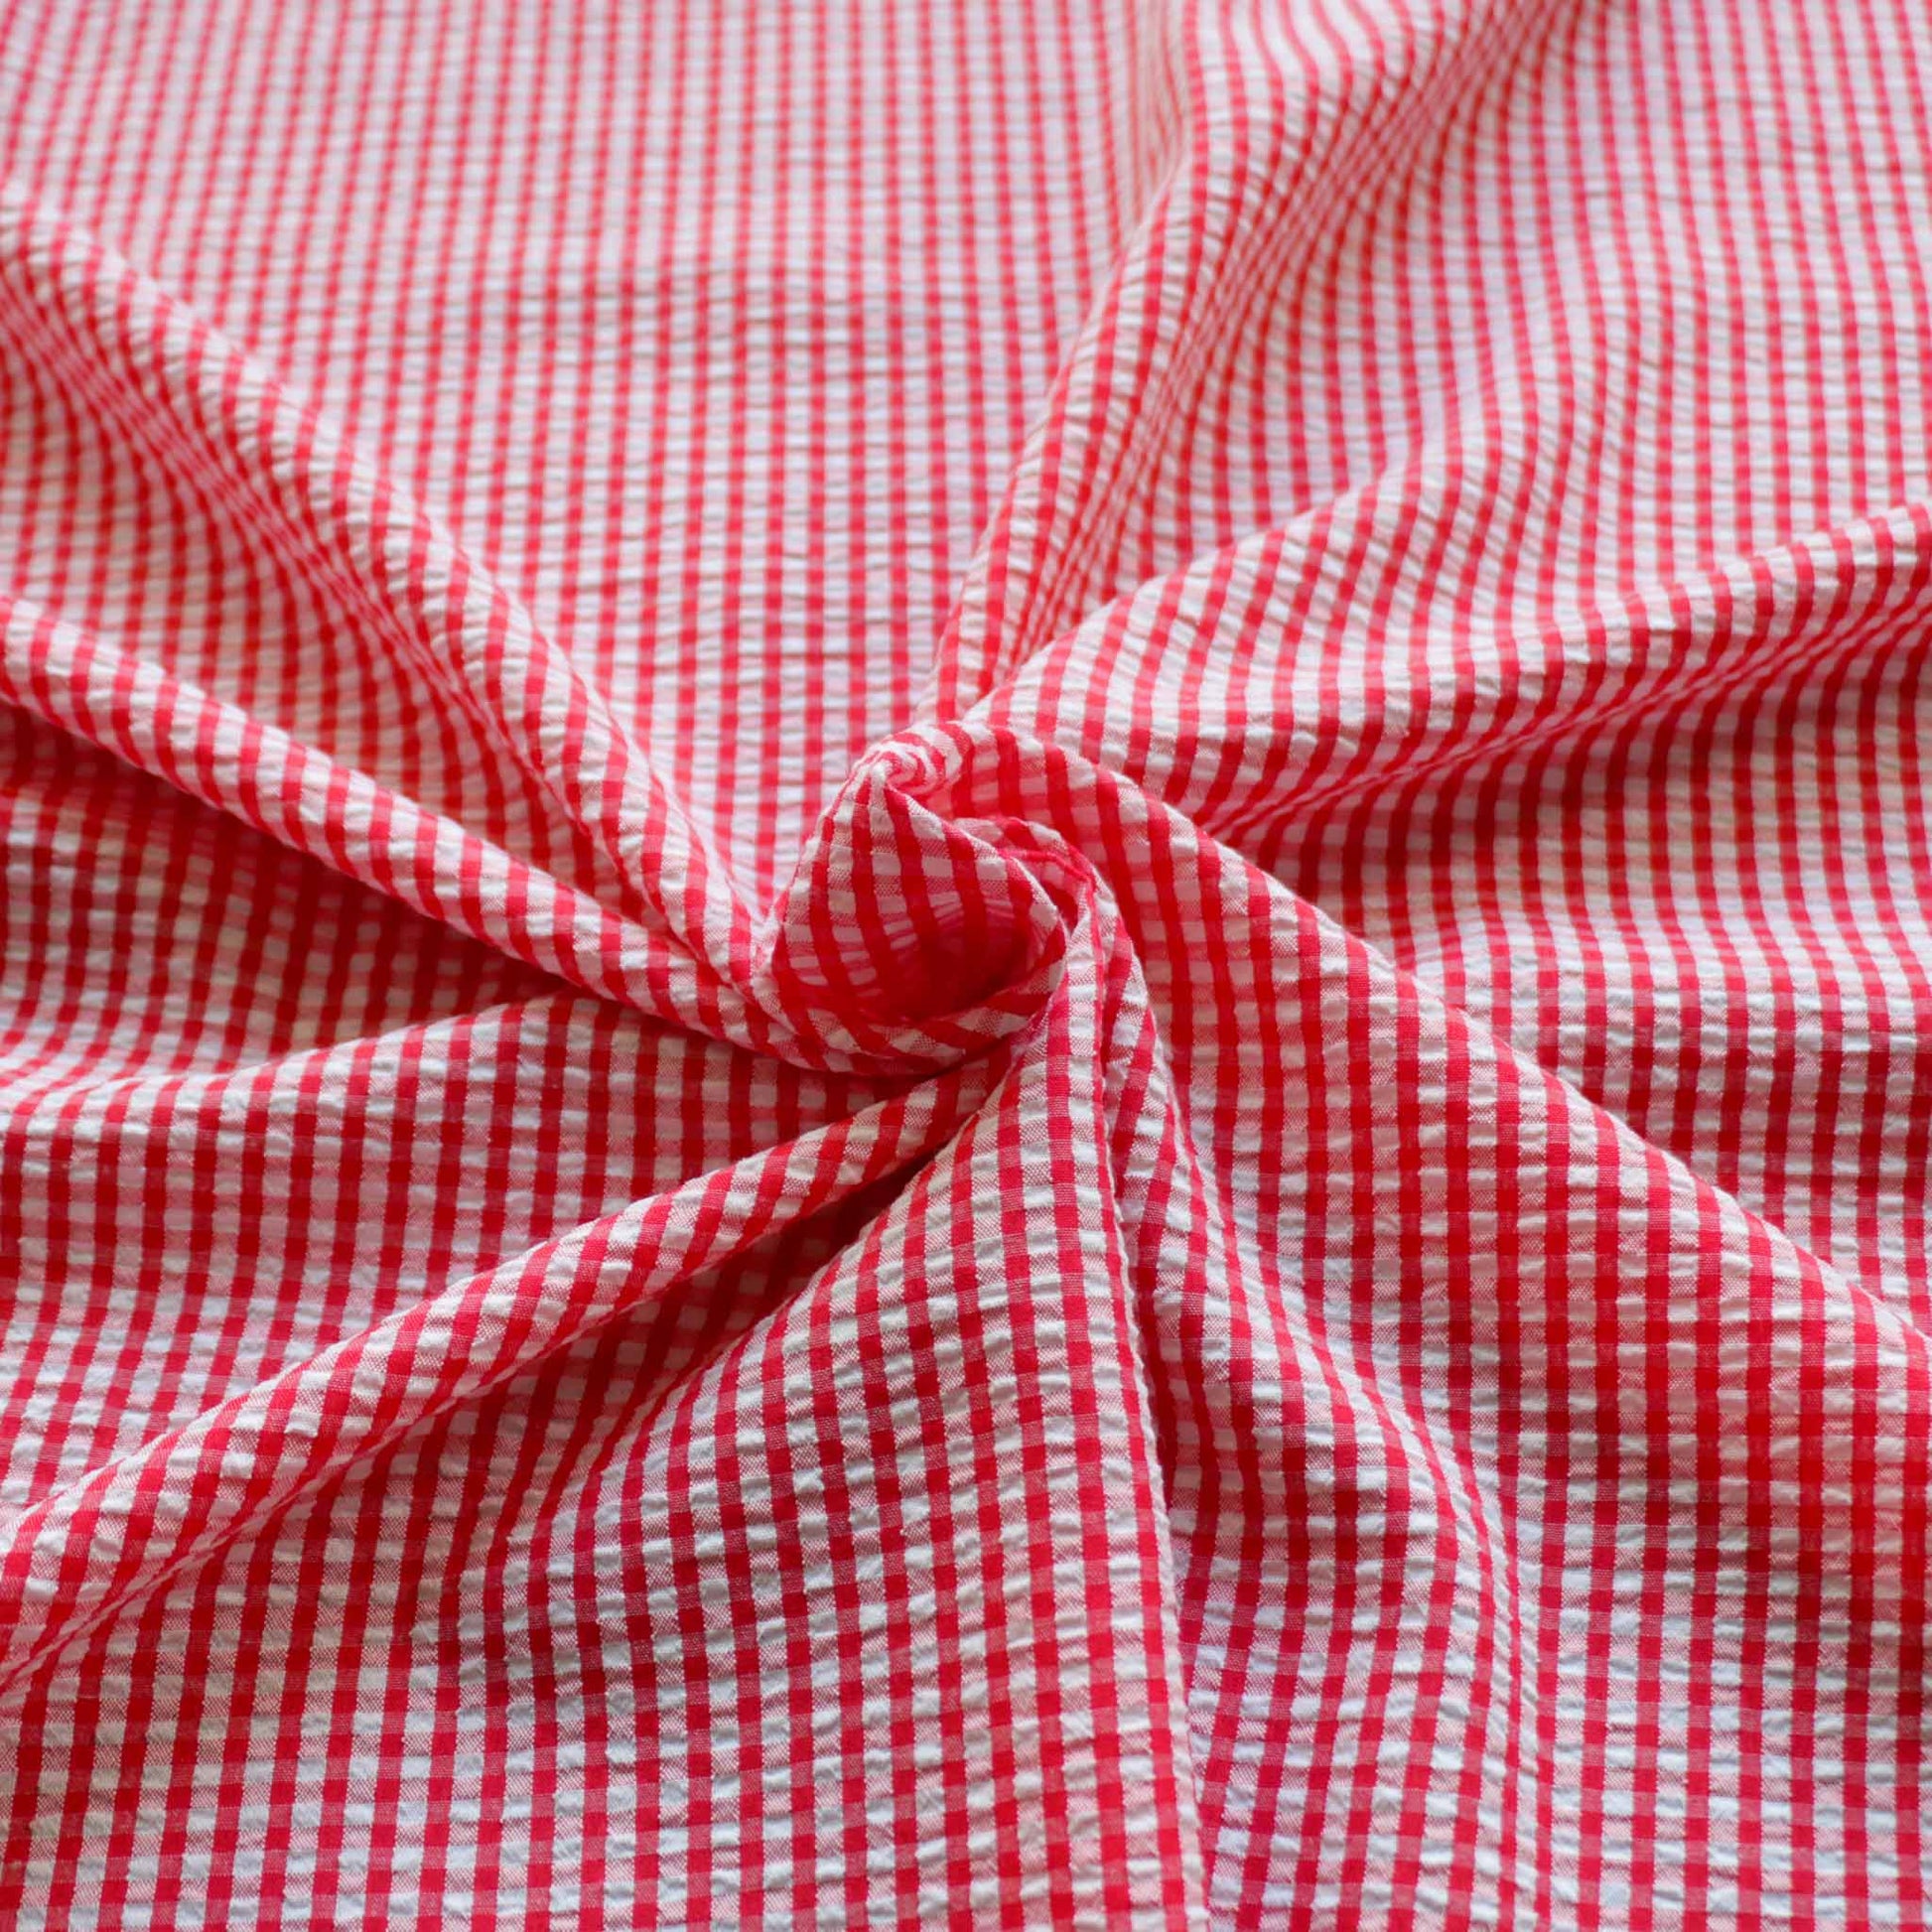 seersucker dressmaking fabric in red and white gingham style design